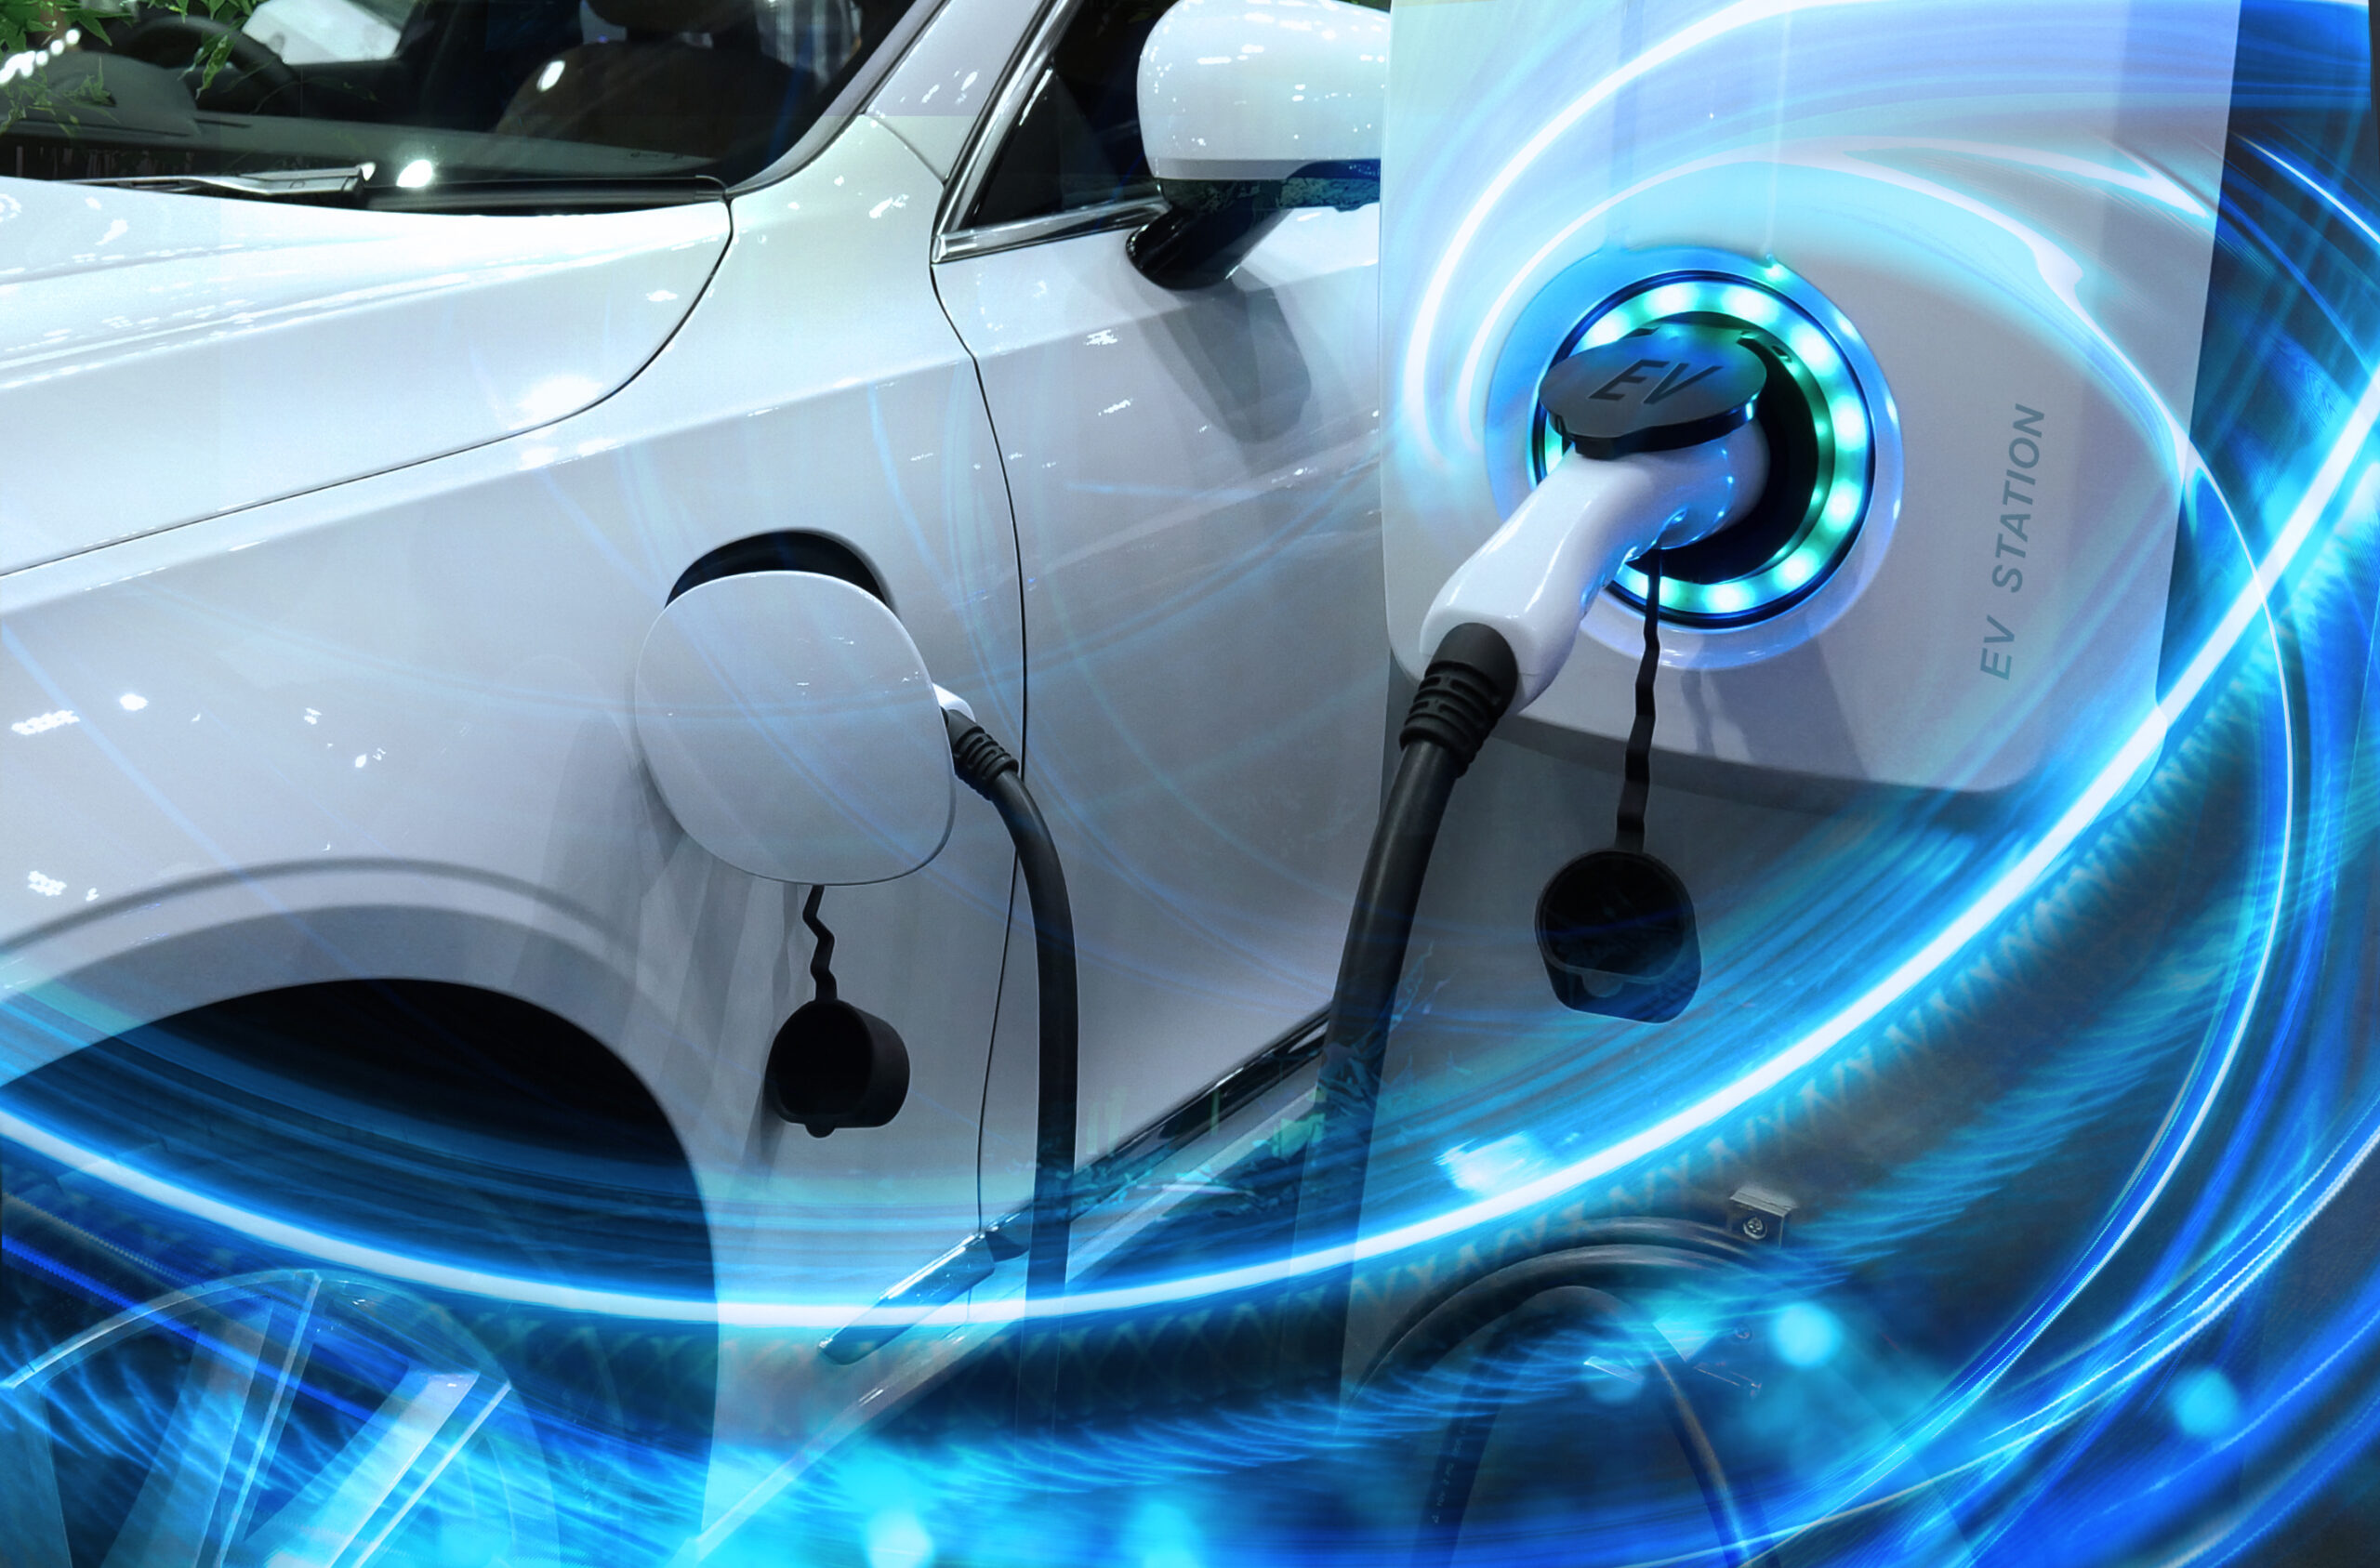 Electrifying your fleet won’t happen overnight, but here’s how to get started